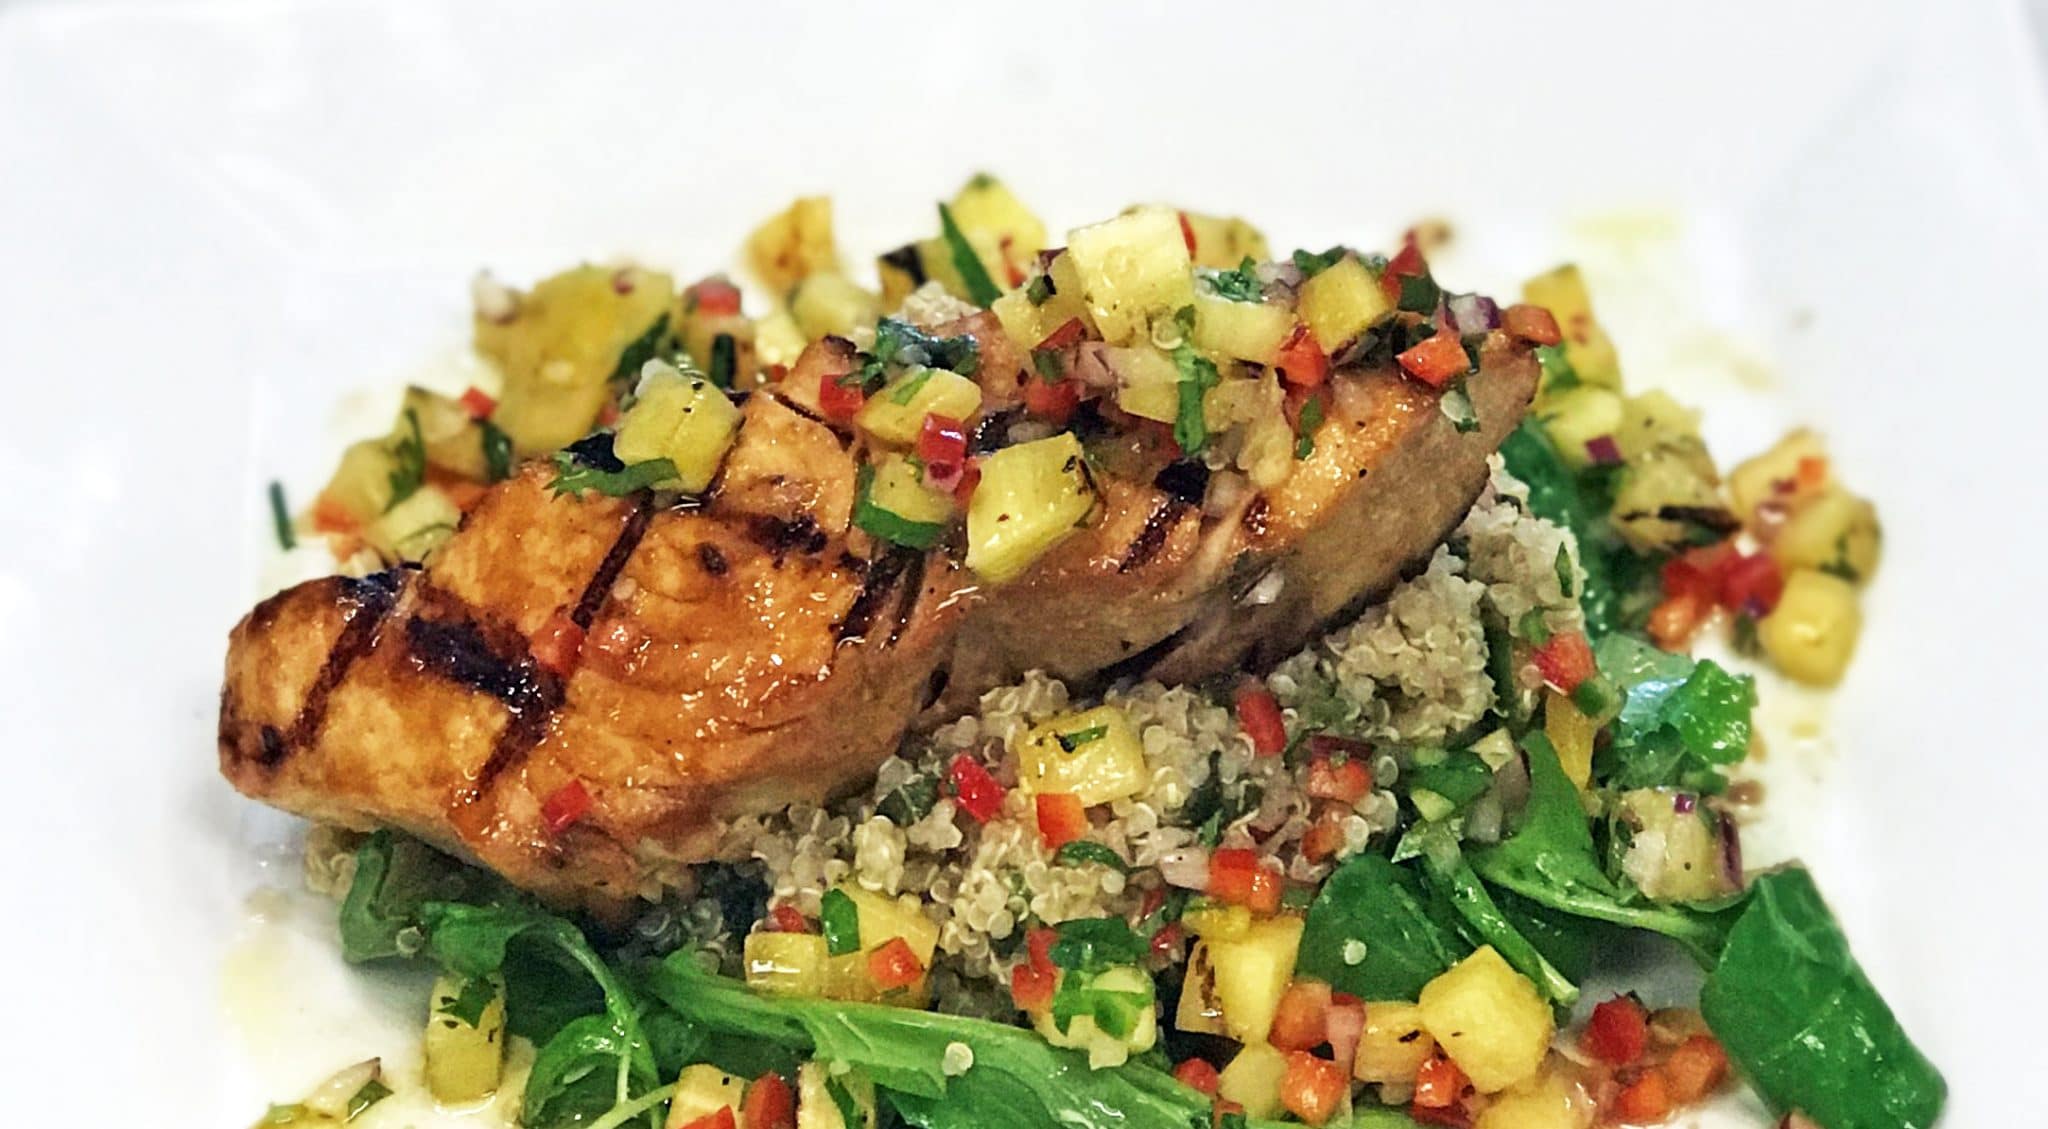 Grilled Opah with Baby Spinach and Quinoa Salad Topped with Pineapple Salsa